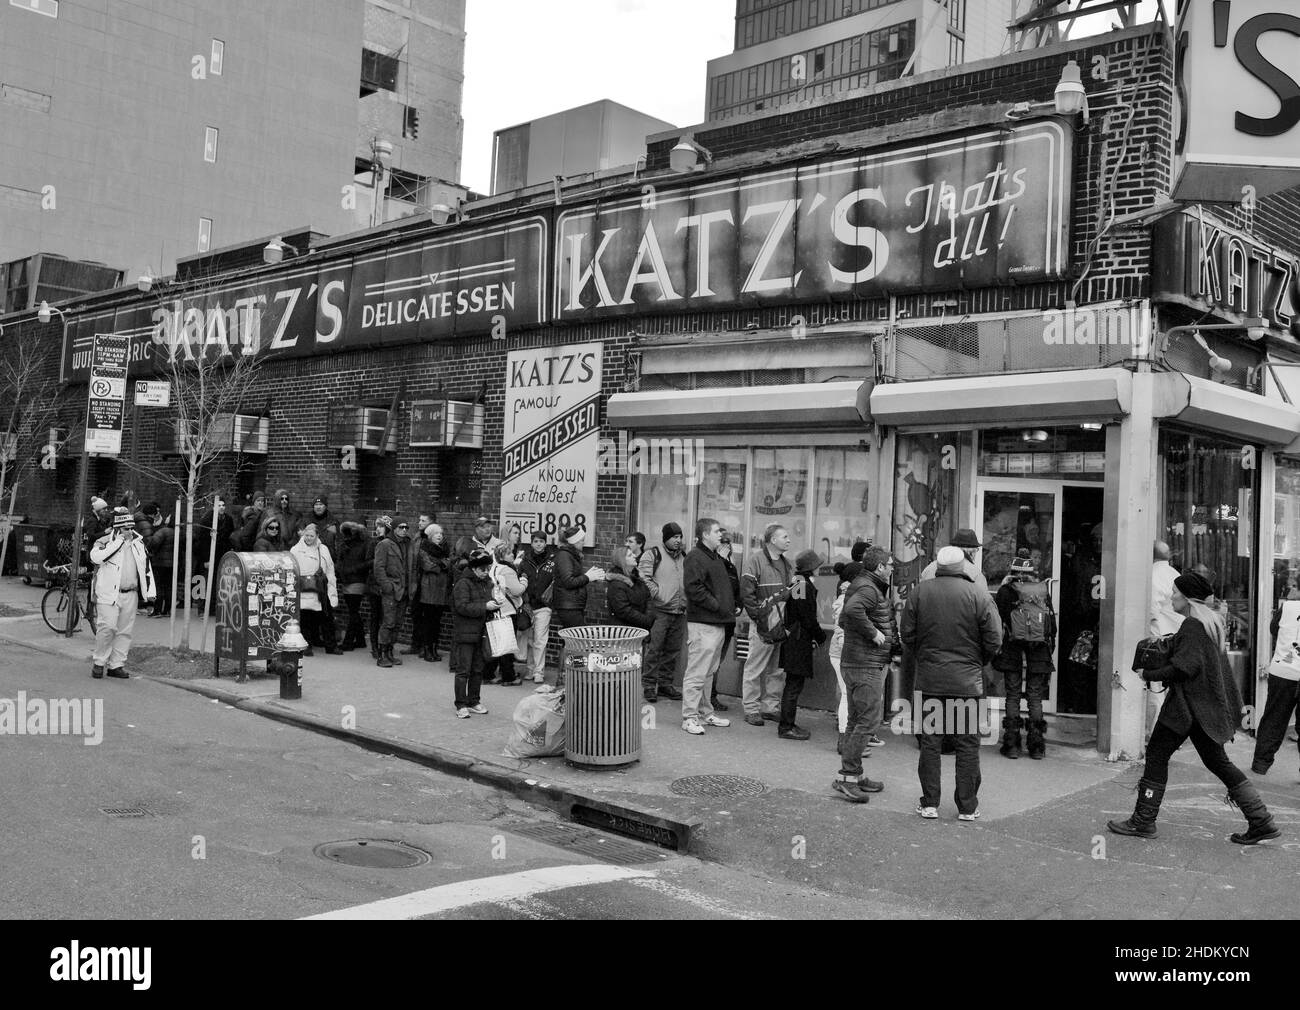 Outside of World famous Katz's Deli, located on the lower east side of Manhattan, NYC, USA. Crowd lines up to get in. Stock Photo